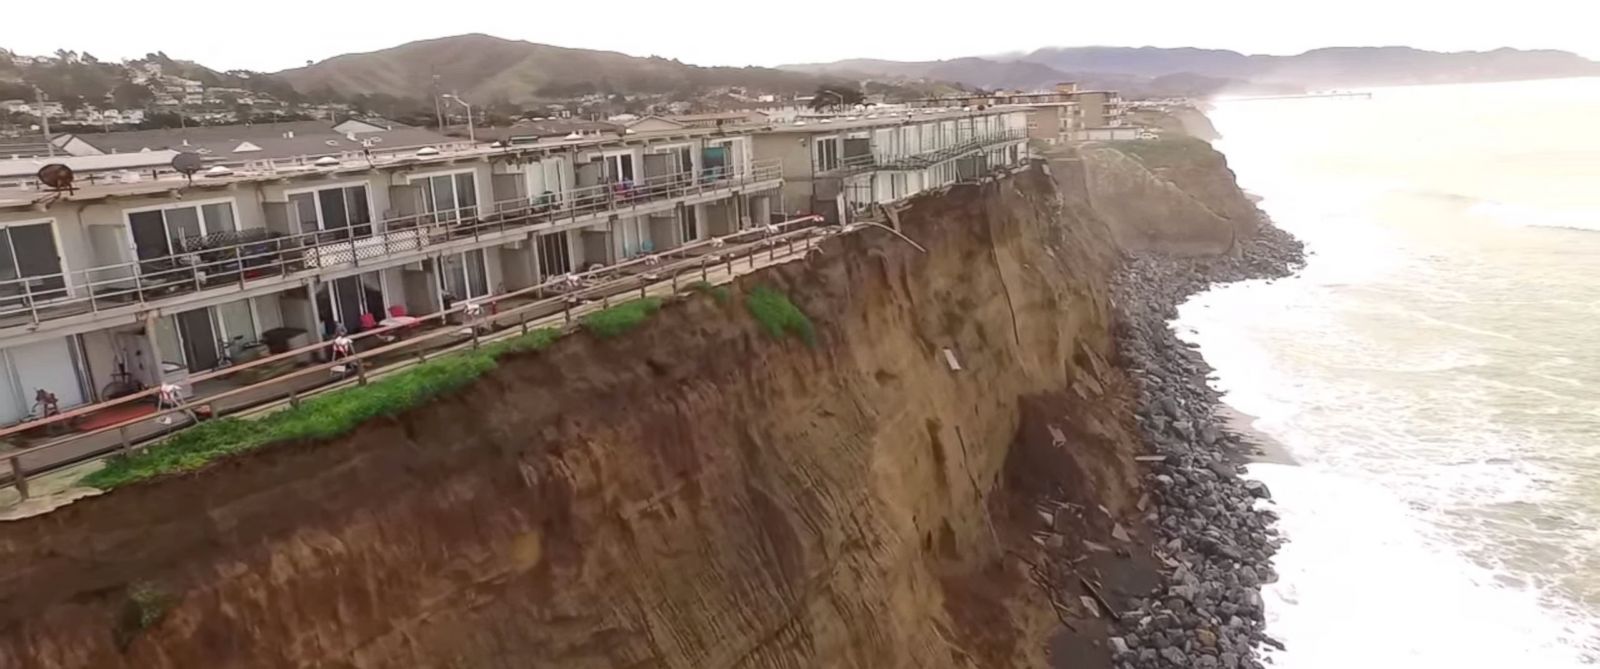 Dramatic Photos Show Apartments Just Feet Away From Falling Into the